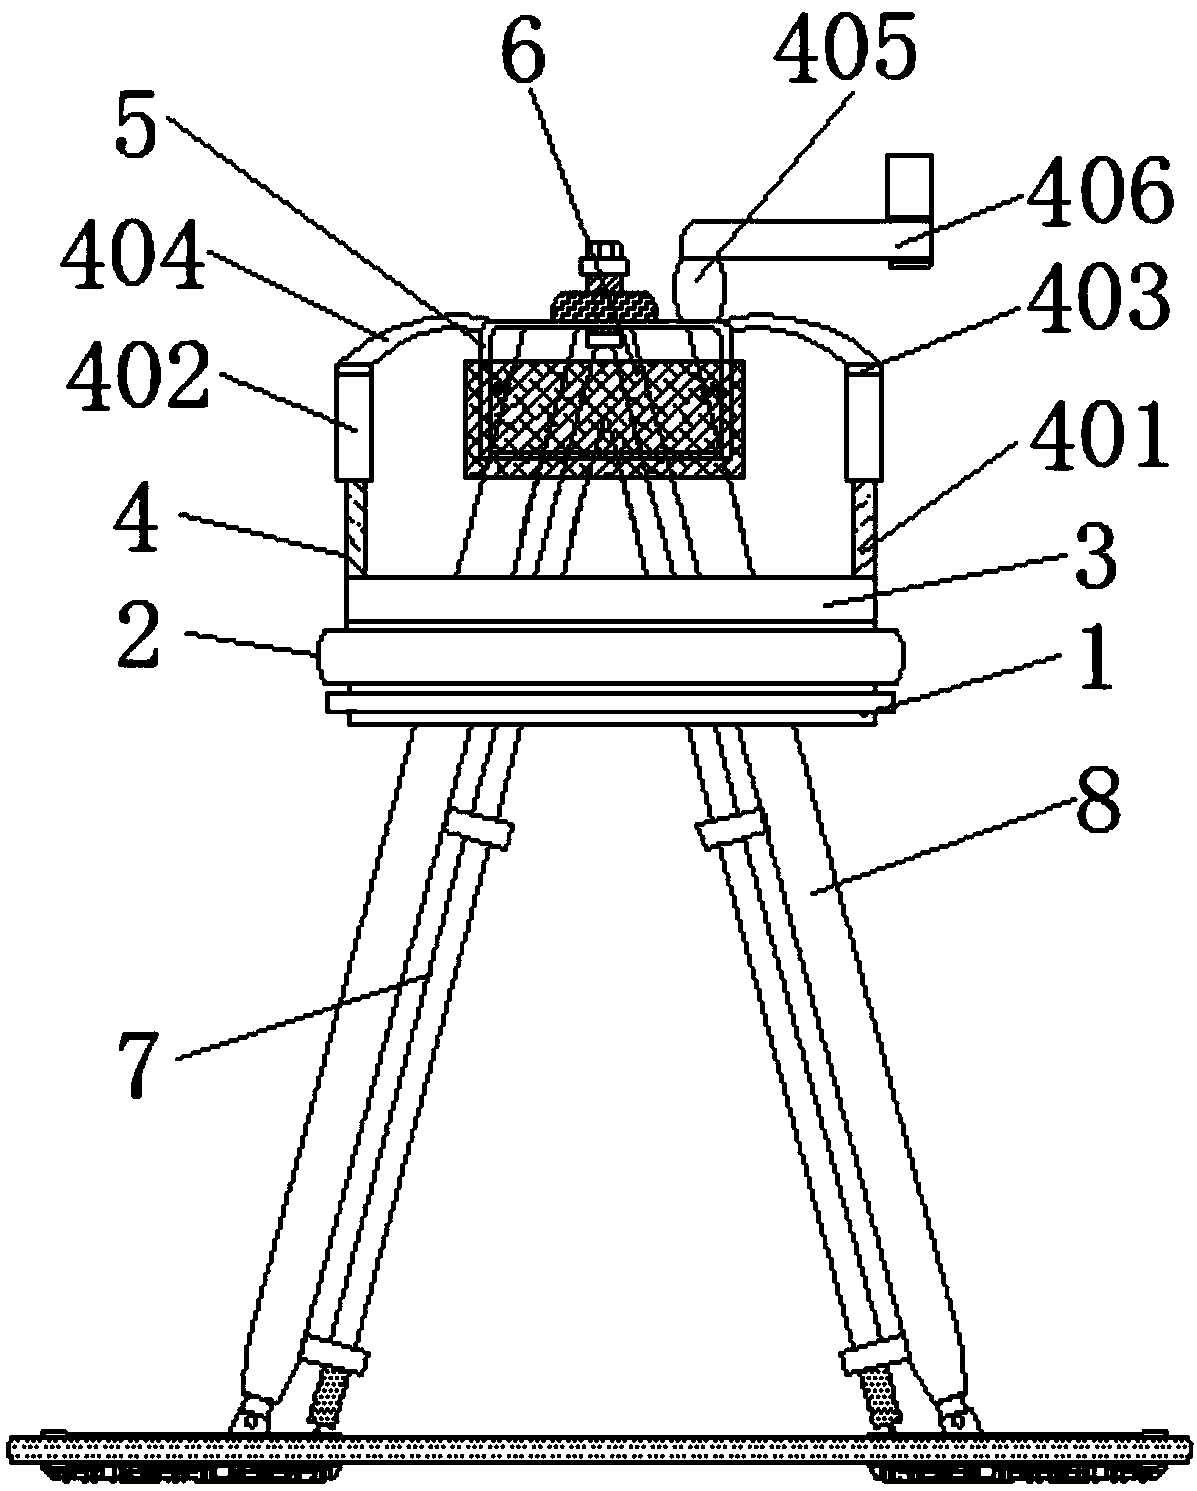 Three-opening flask washing device with cleaning range capable of being directionally controlled